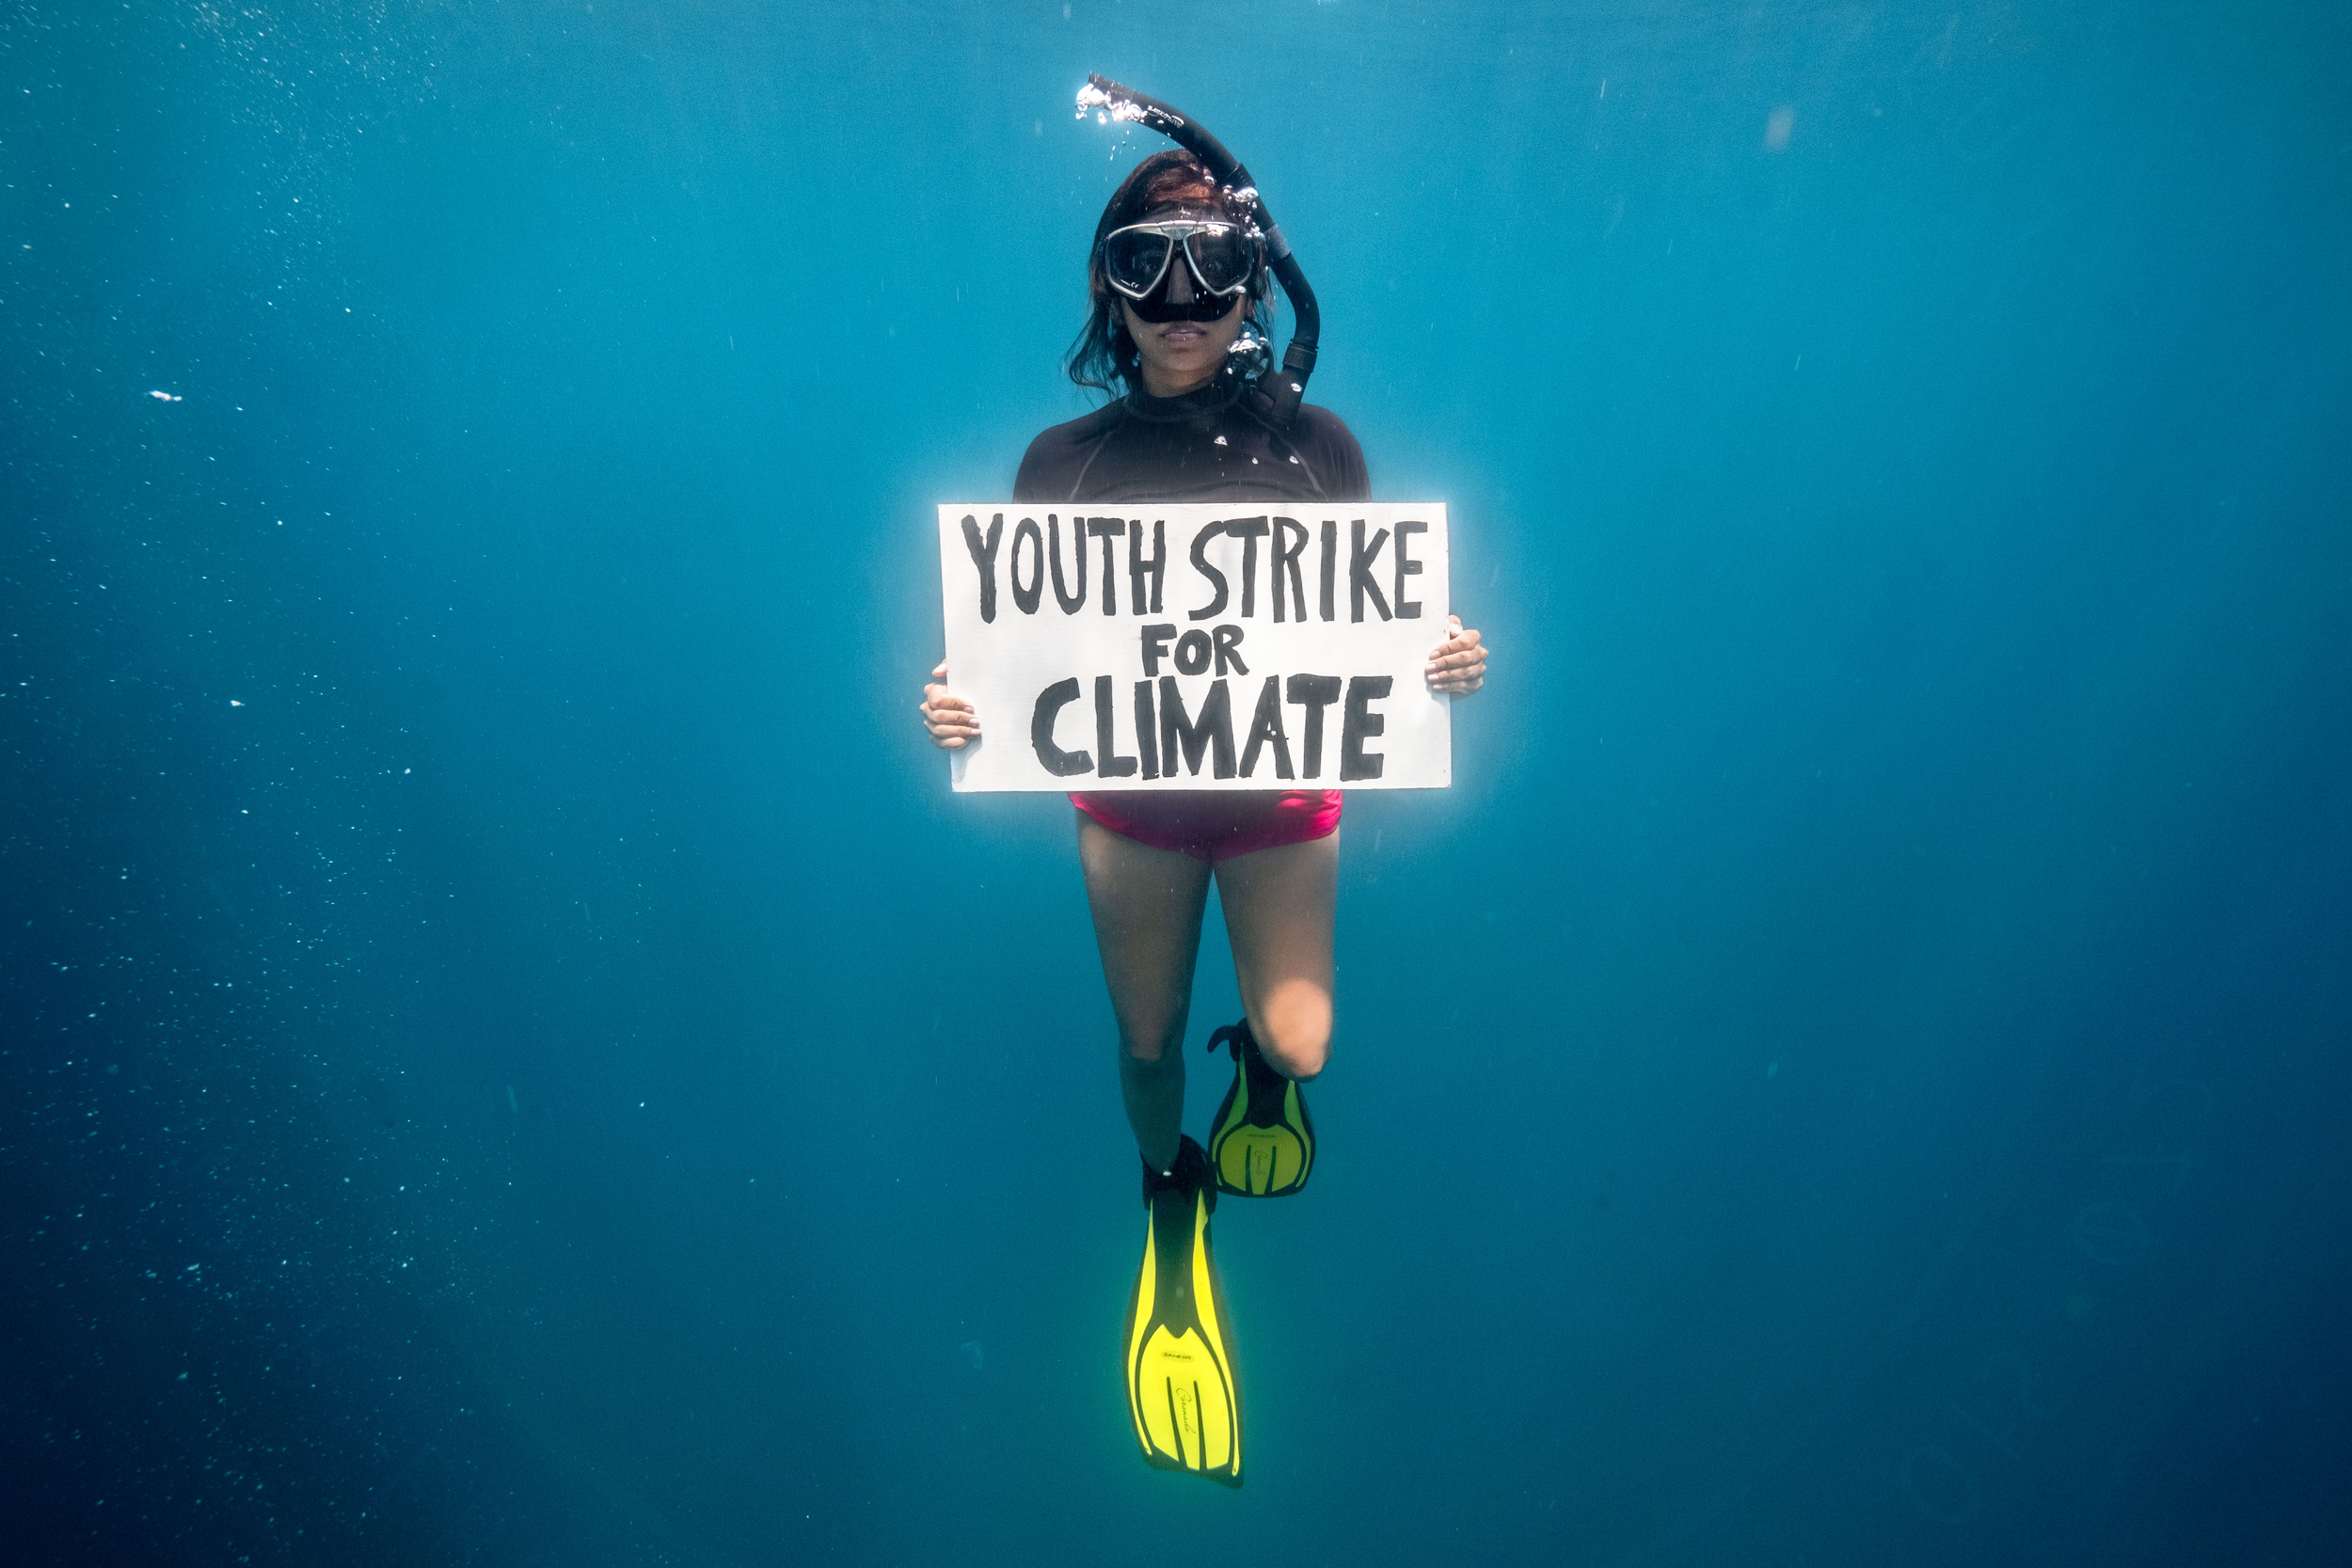 Suspended in a clear blue ocean, an activist in a snorkel, fins, rash vest and shorts holds up a sign reading 'Youth strike for climate'.